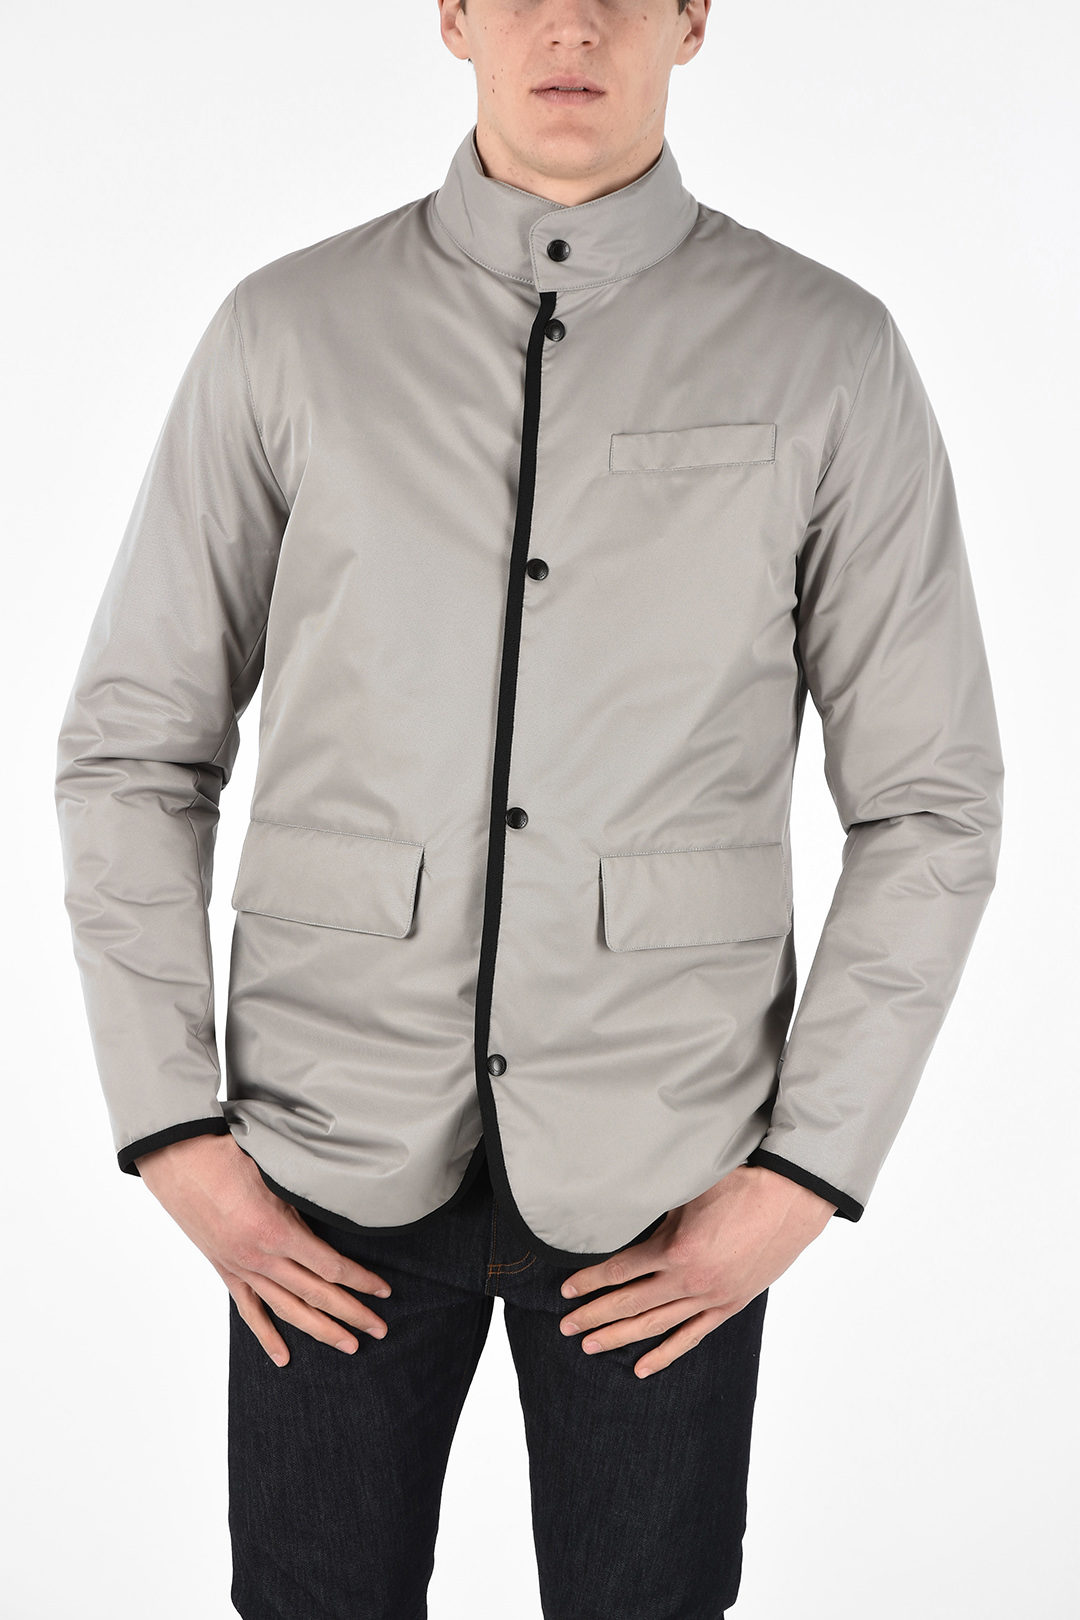 ZZEGNA Reversible Jacket with Snap Button Closure